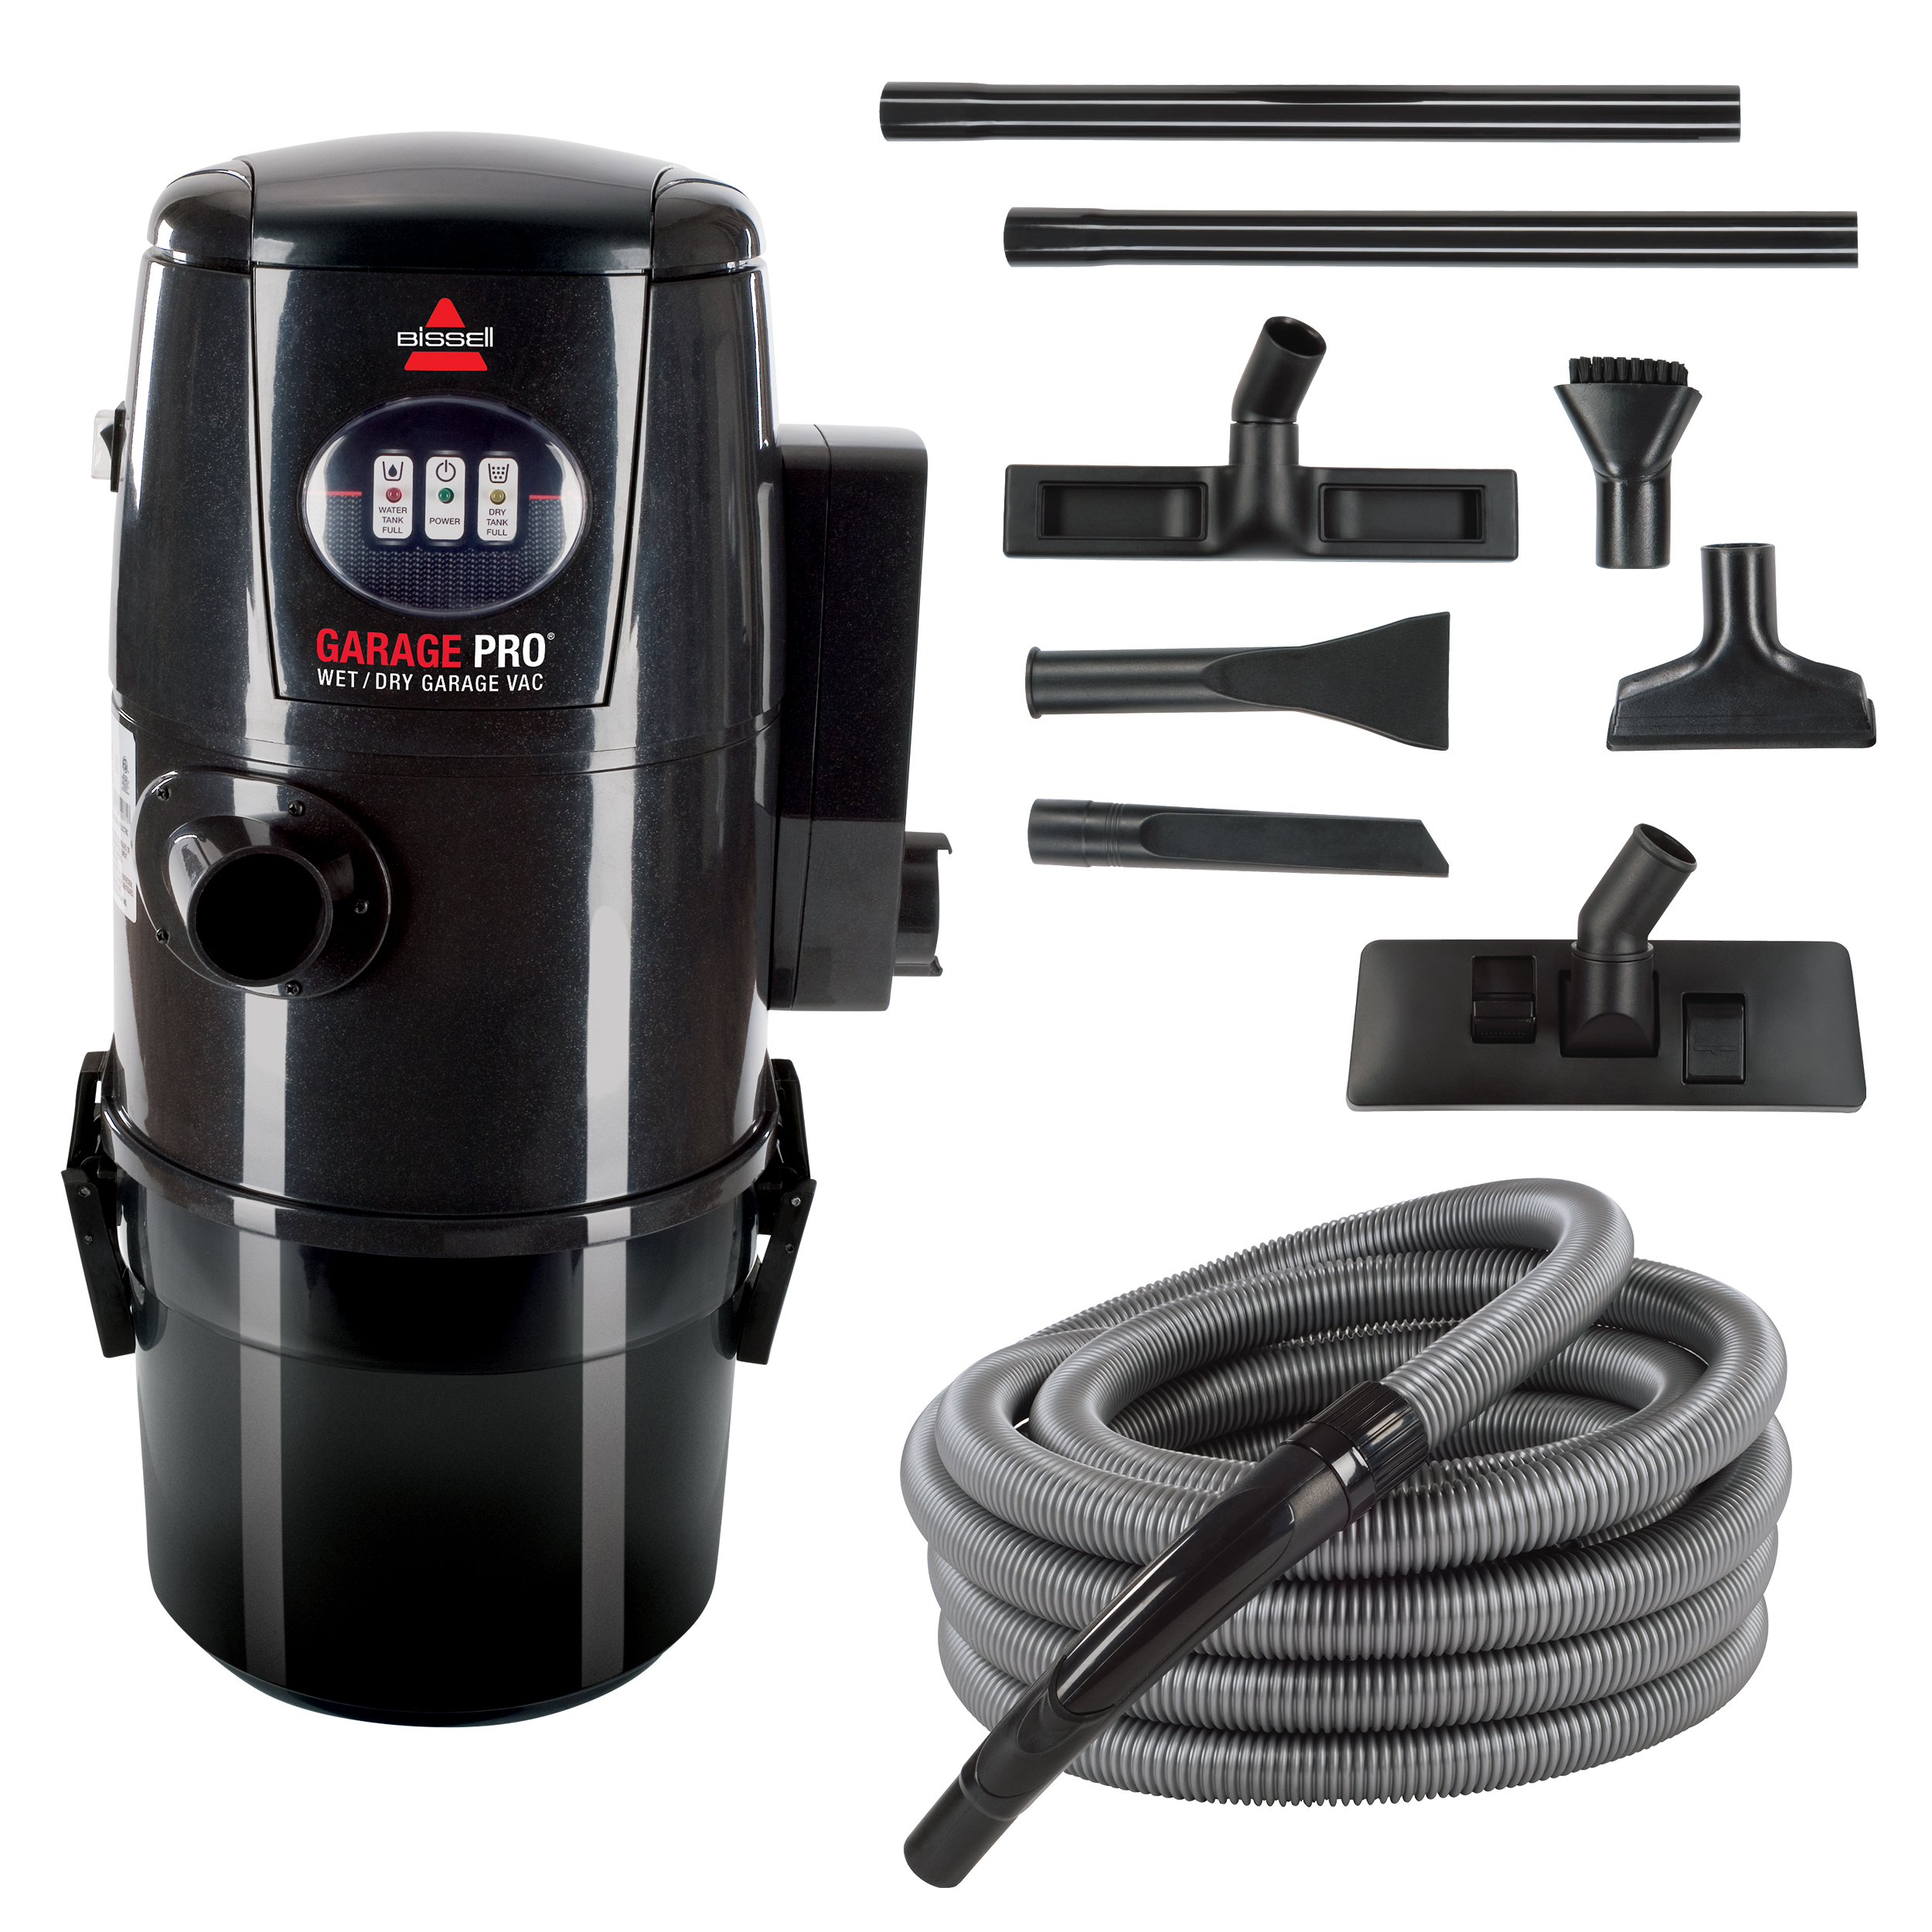 Bissell Garage Pro Wet/Dry Car and Garage Vacuum with Auto Tool Kit, 18P03 - image 1 of 8